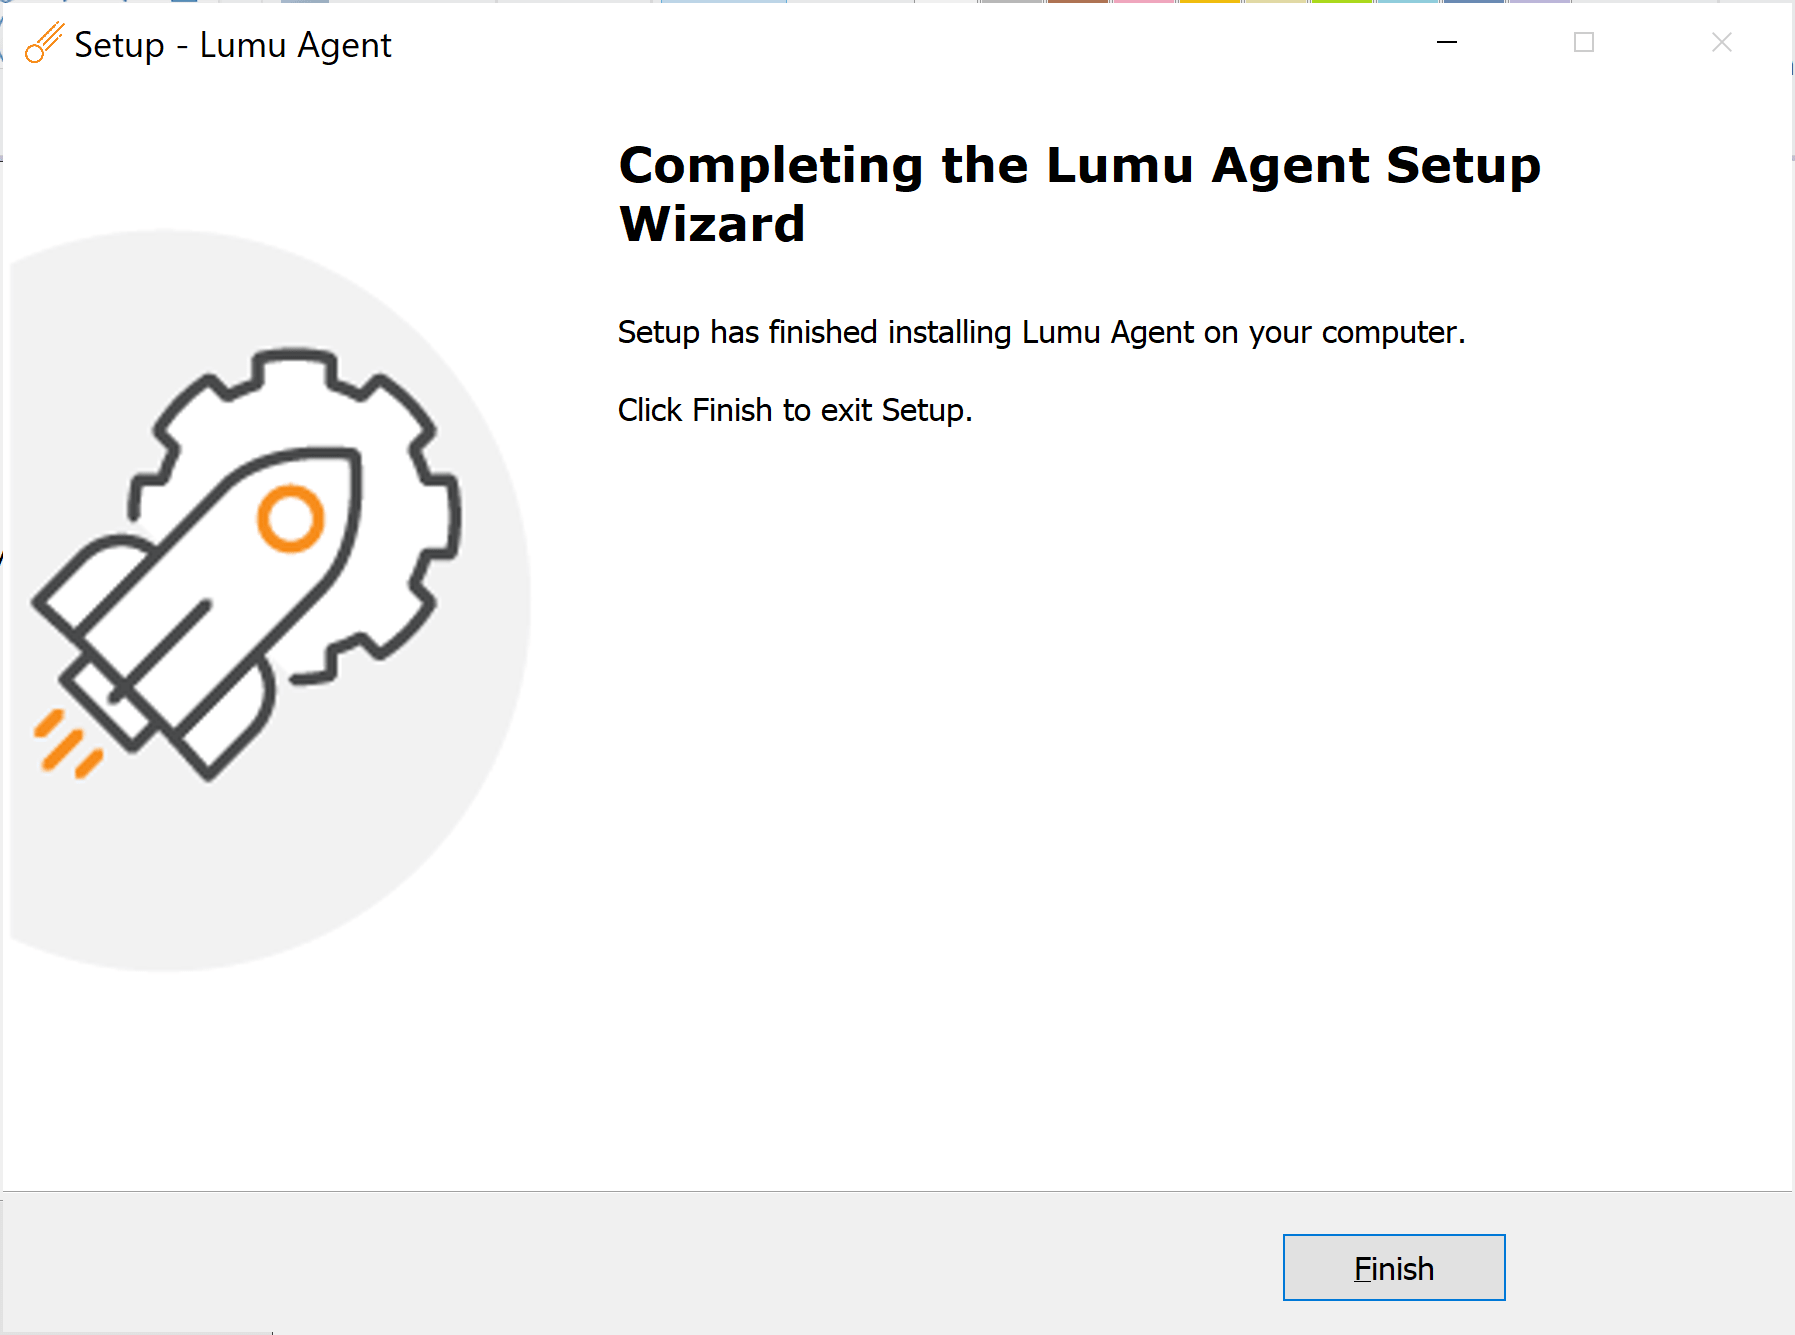 Completing the Lumu Agent for Windows set up